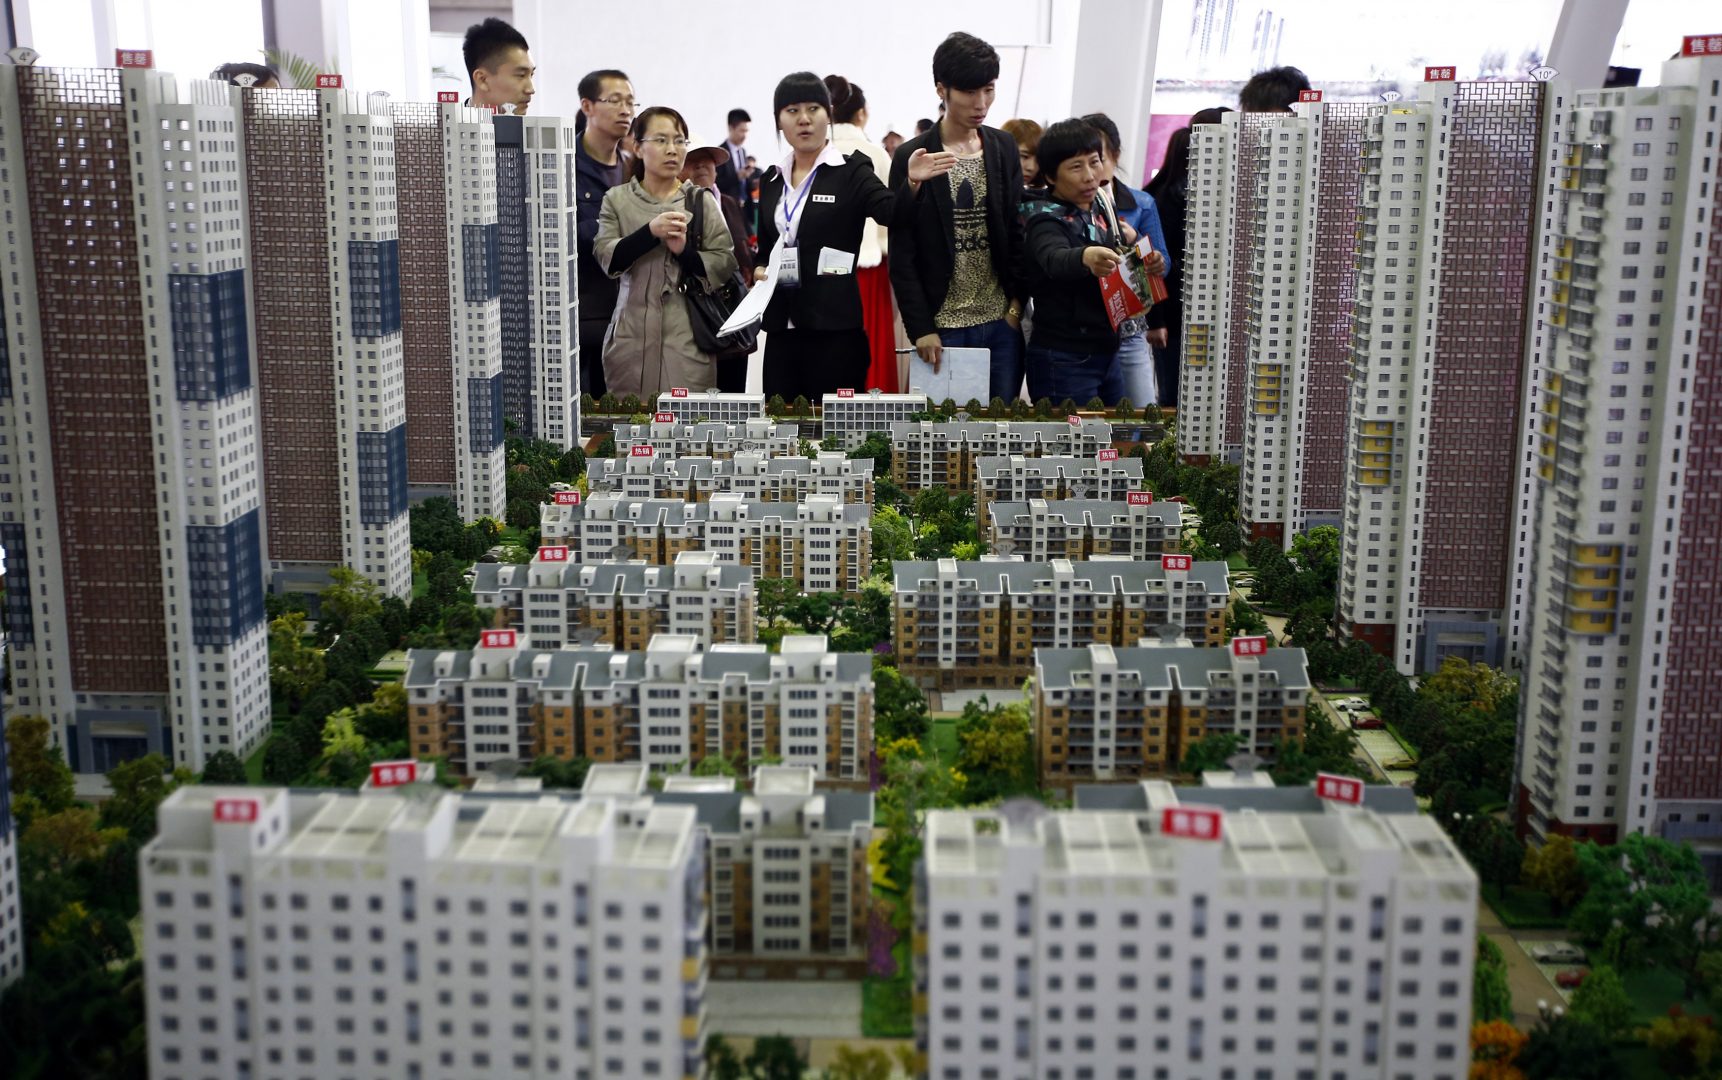 A sales assistant talks to visitors in front of models of apartments at a real estate exhibition in Shenyang, Liaoning province April 17, 2014. China's real estate investment rose 16.8 percent in first three months of 2014 from a year earlier, and revenues from property sales dropped an annual 5.2 percent, the National Bureau of Statistics said on Wednesday. REUTERS/Stringer (CHINA - Tags: REAL ESTATE BUSINESS) CHINA OUT. NO COMMERCIAL OR EDITORIAL SALES IN CHINA - RTR3LM1B